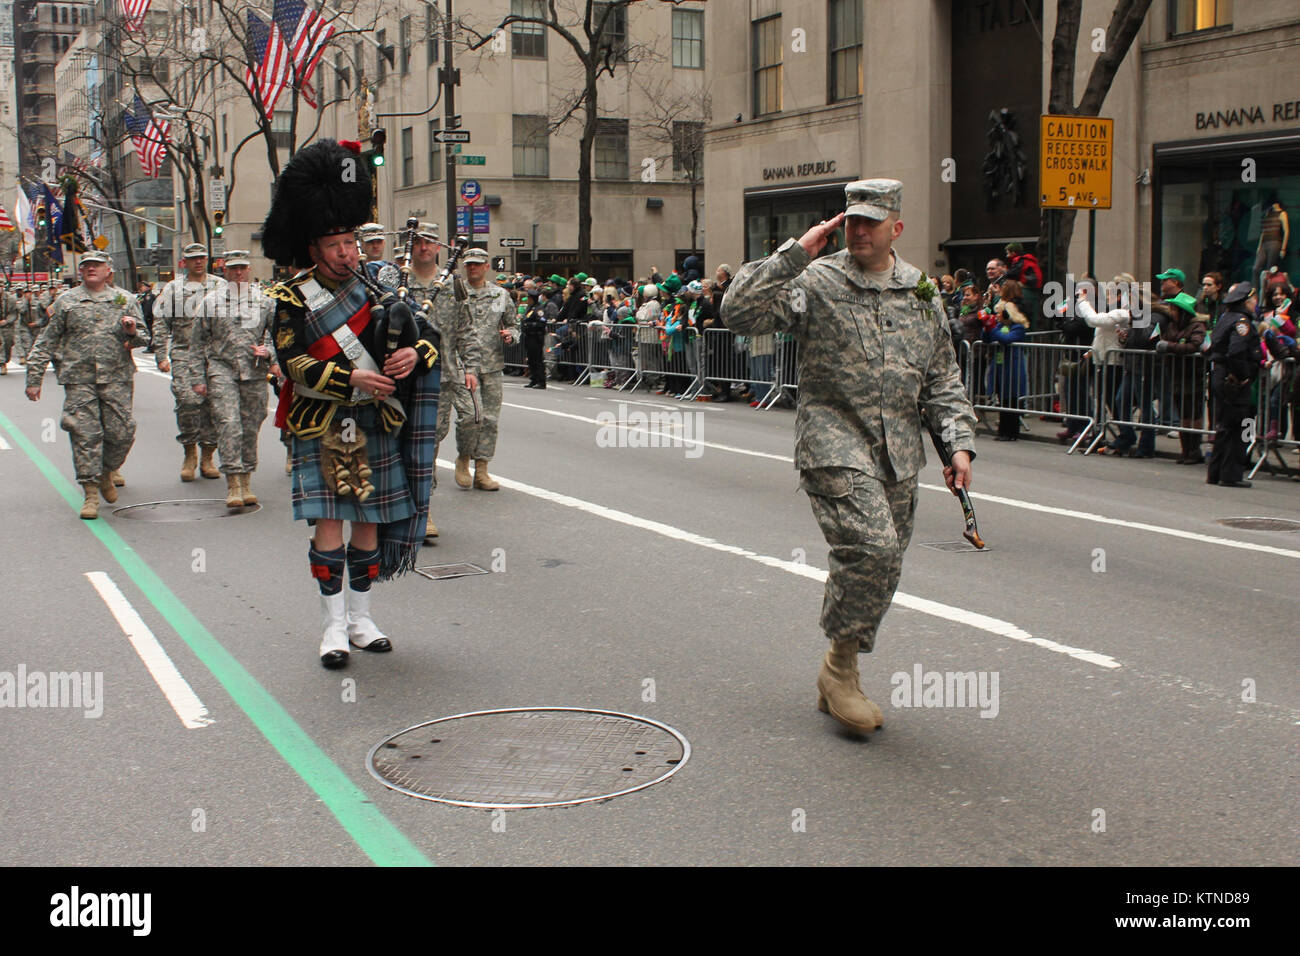 Soldiers of the 1st Battalion, 69th Infantry Division participated in St. Patrick's Day festivities in Manhattan. The day began with a toast, continued with a parade down 5th Ave., and ended with a ceremony at the Lexington Armory. (U.S. National Guard Photo by Spc. J.p. Lawrence, 42nd Infantry Division PAO). Stock Photo